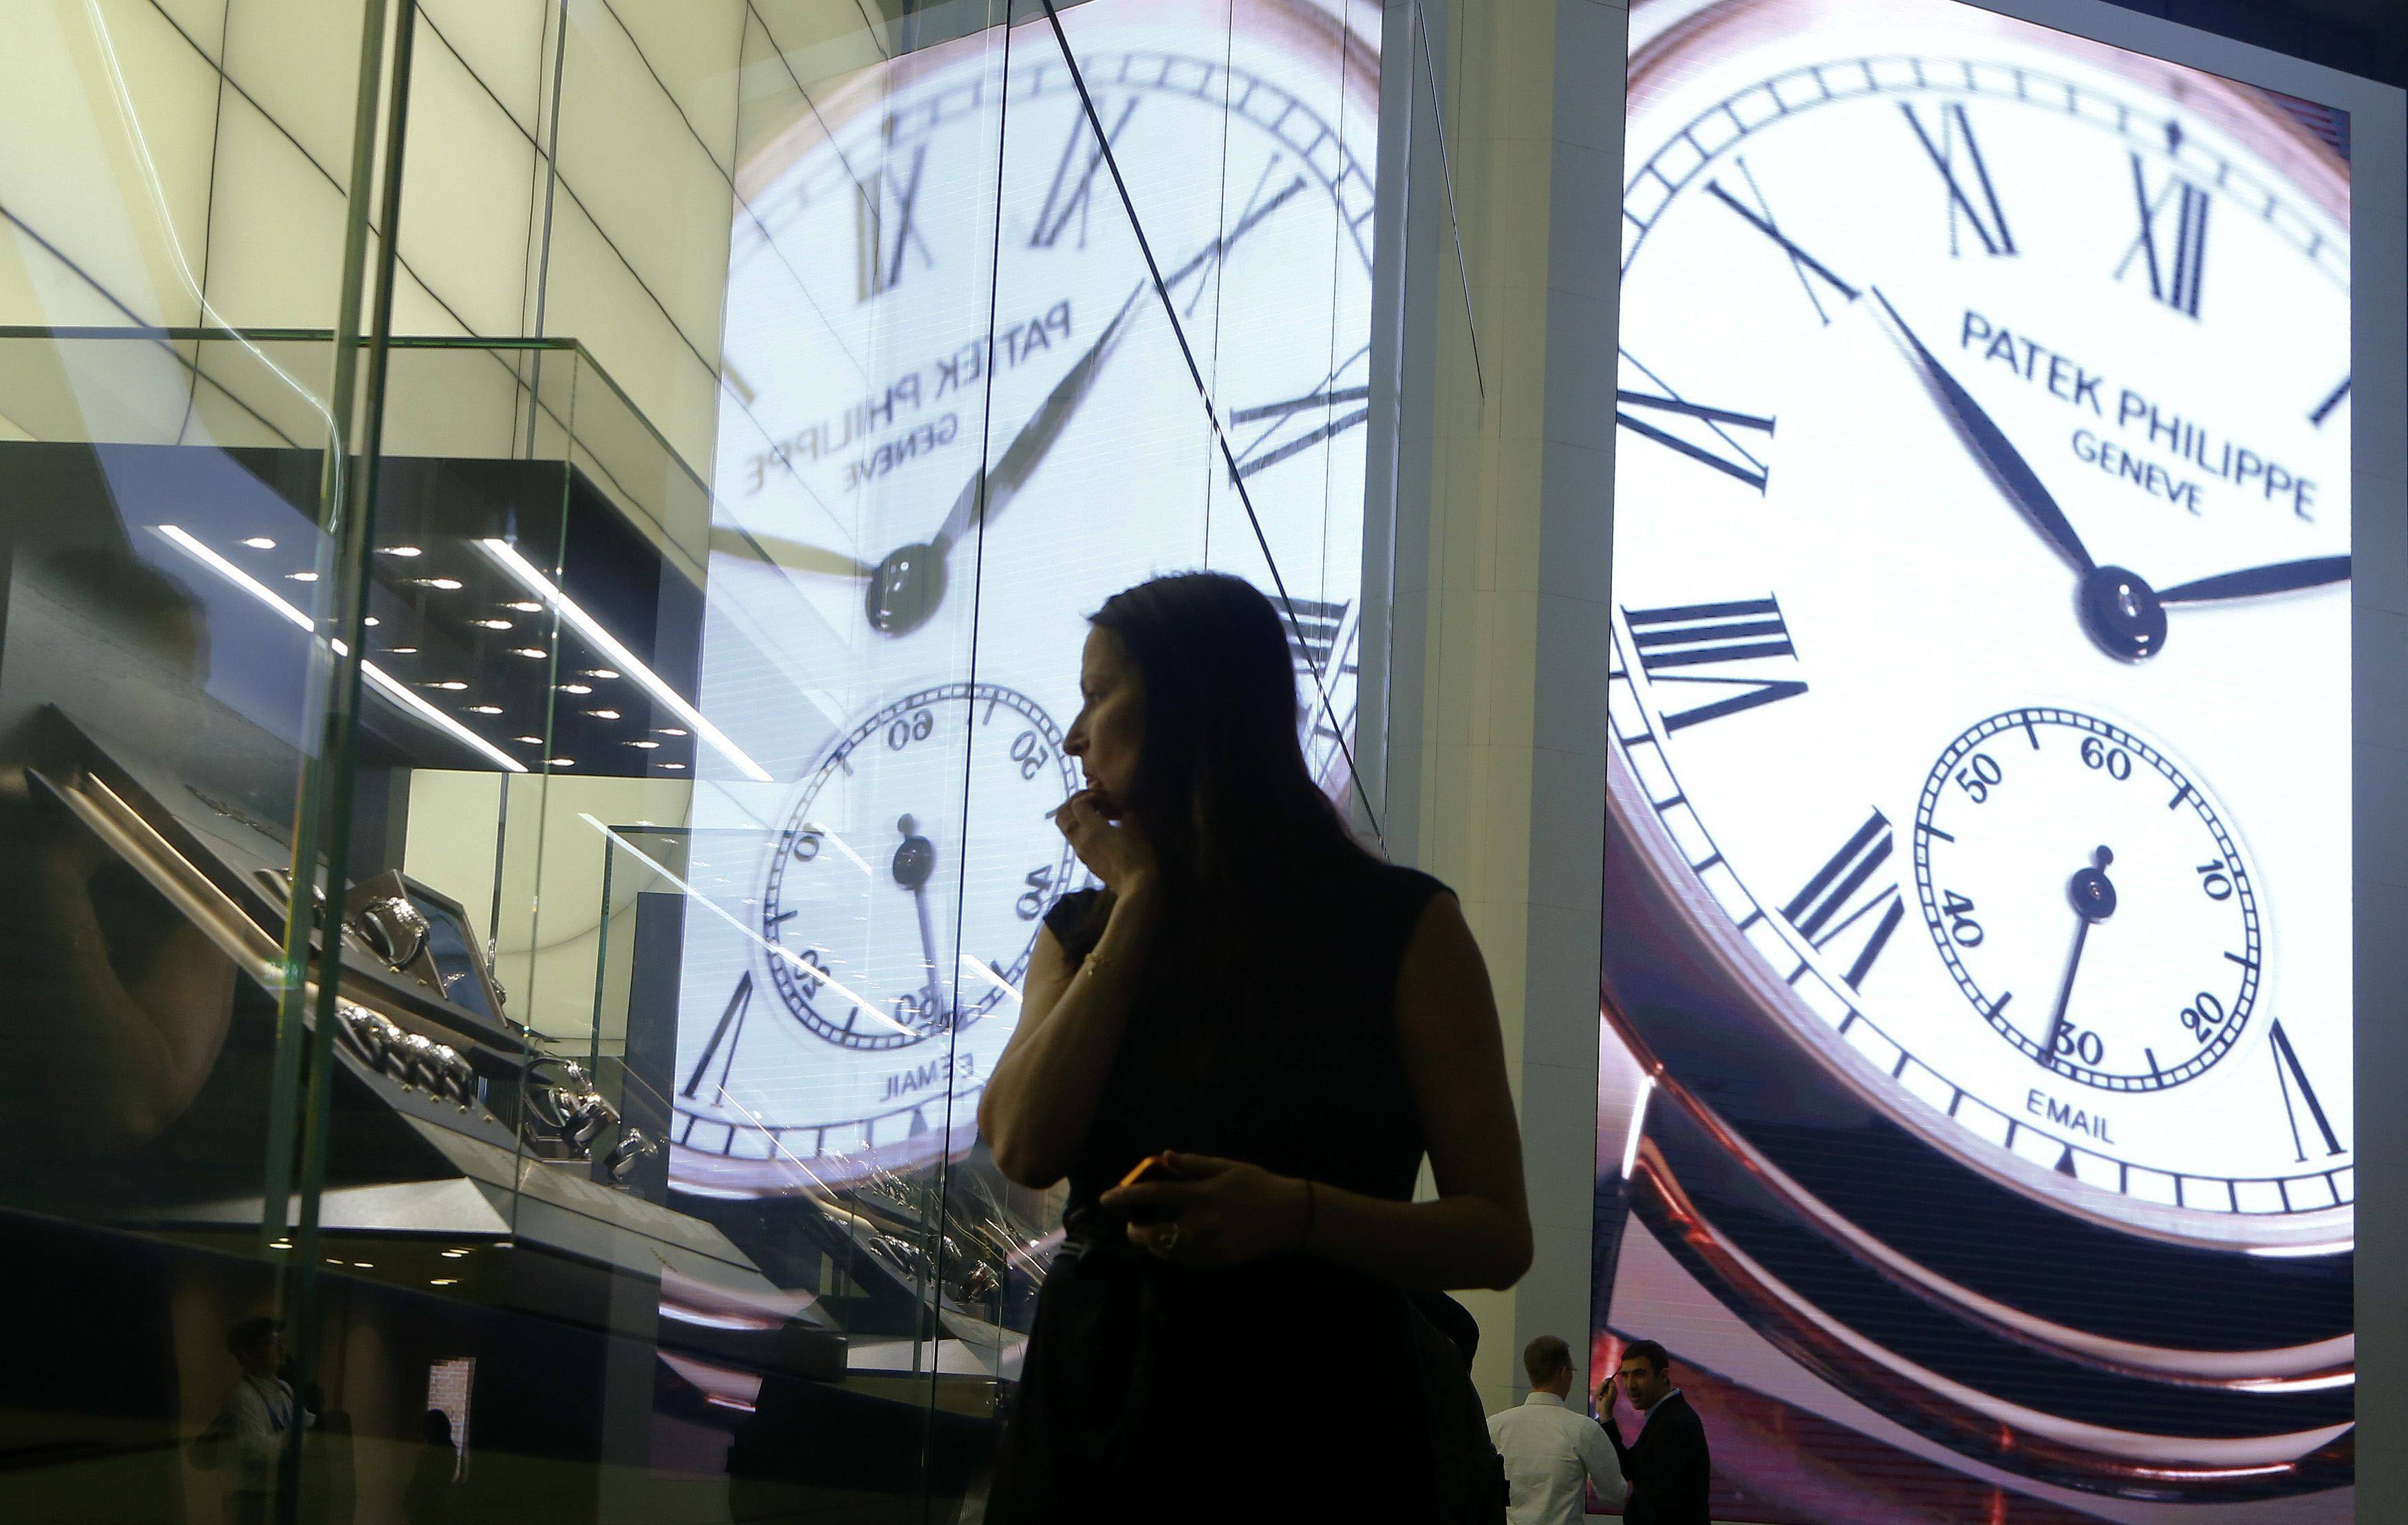 A woman looks at watches displayed at the exhibition stand of Swiss watch manufacturer Patek Philippe at Baselworld fair in Basel April 26, 2014. The world’s leading watch and jewellery show Baselworld is to be held in Basel from March 27 to April 3, 2014.   REUTERS/Arnd Wiegmann (SWITZERLAND - Tags: BUSINESS SOCIETY)